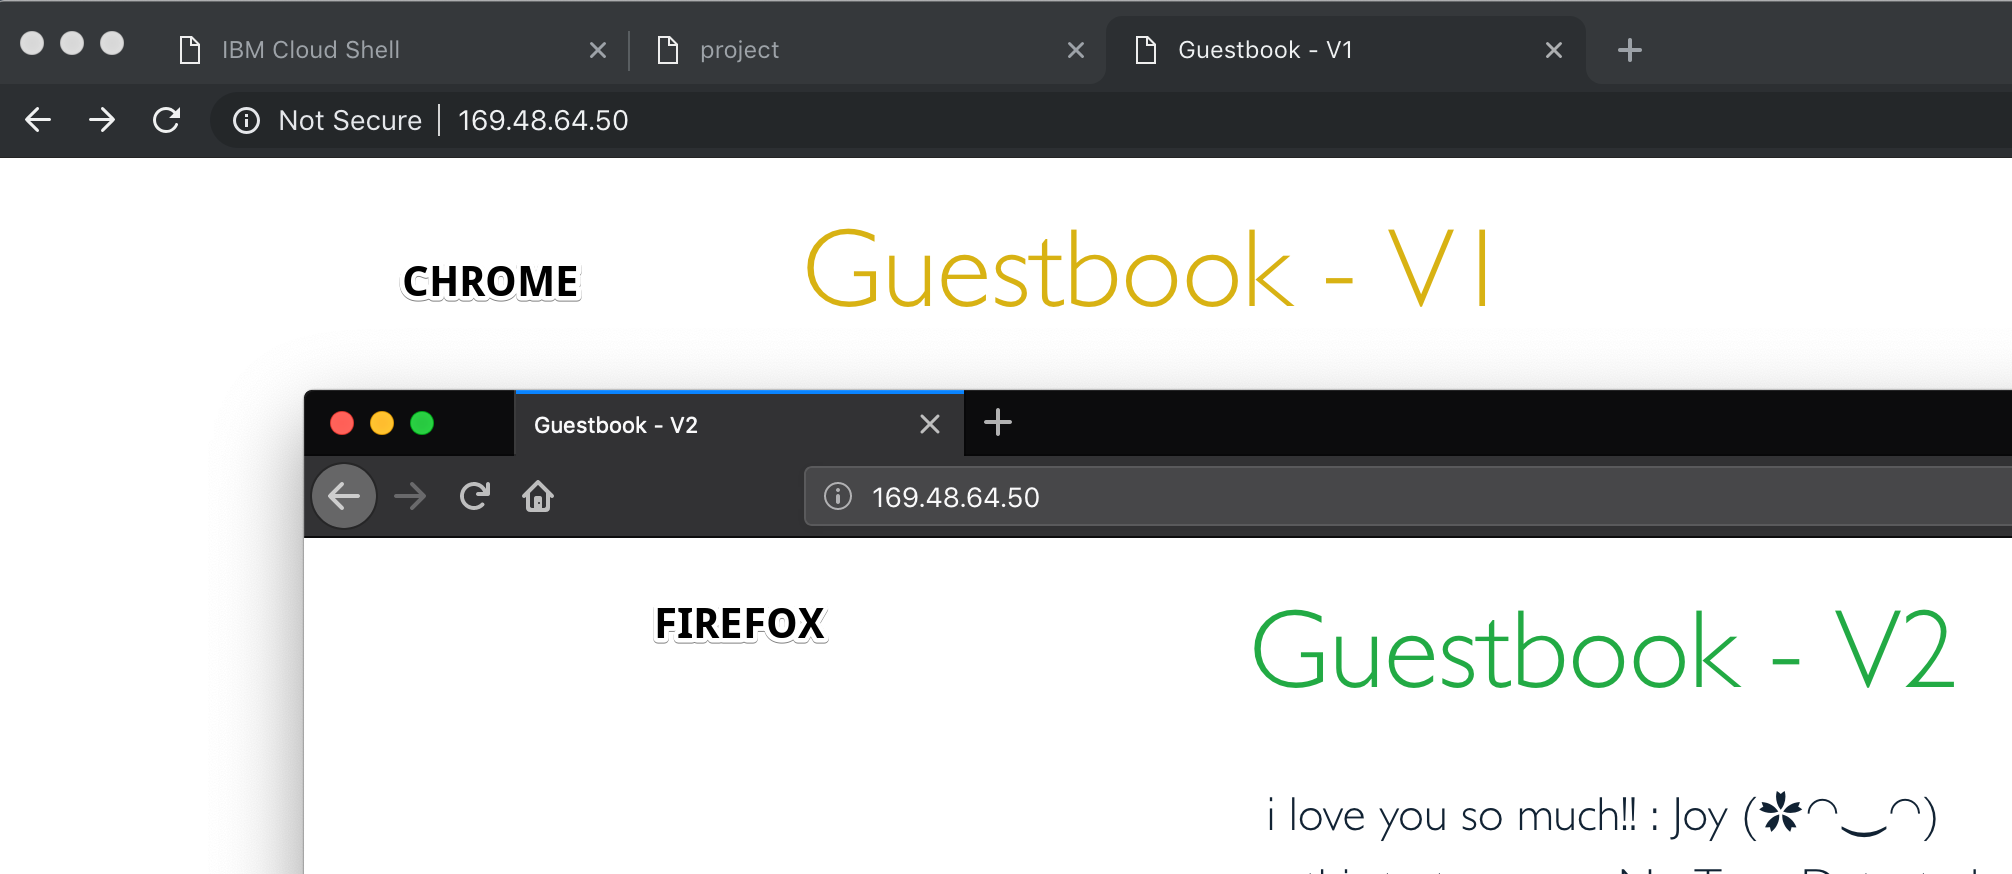 guestbook app in chrome and firefox